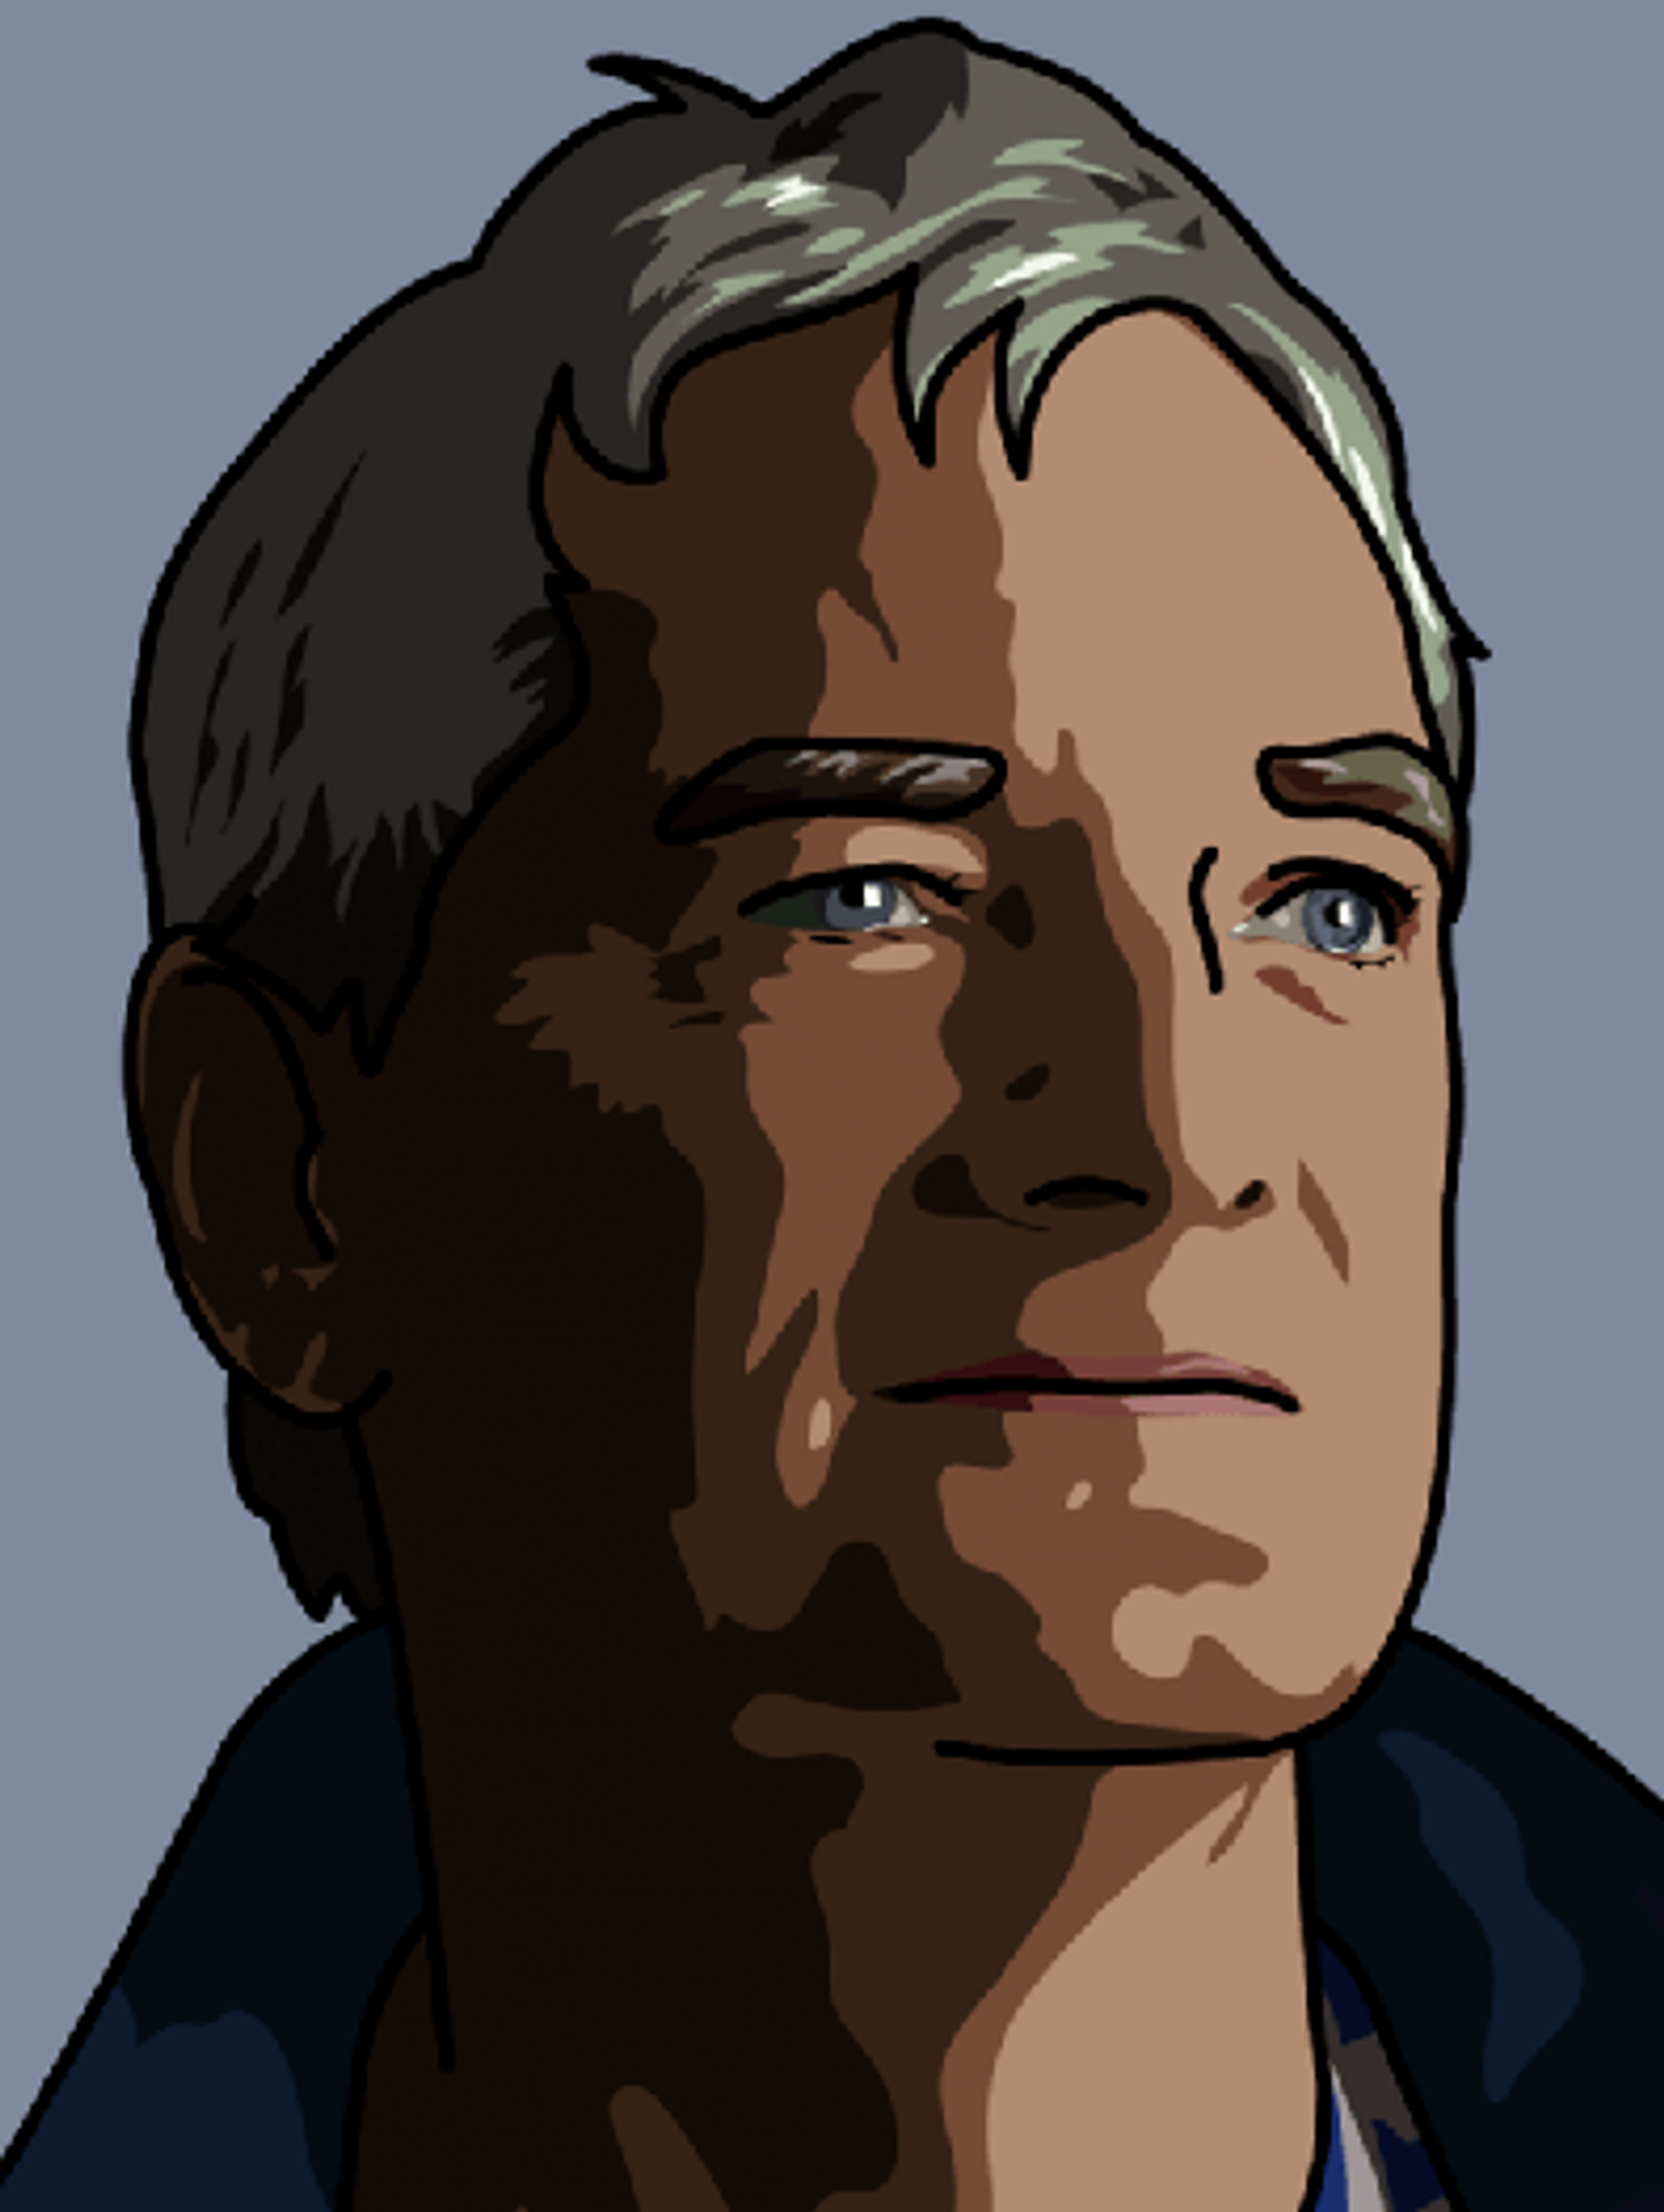 James Dyson ('James, Inventor') by Julian Opie